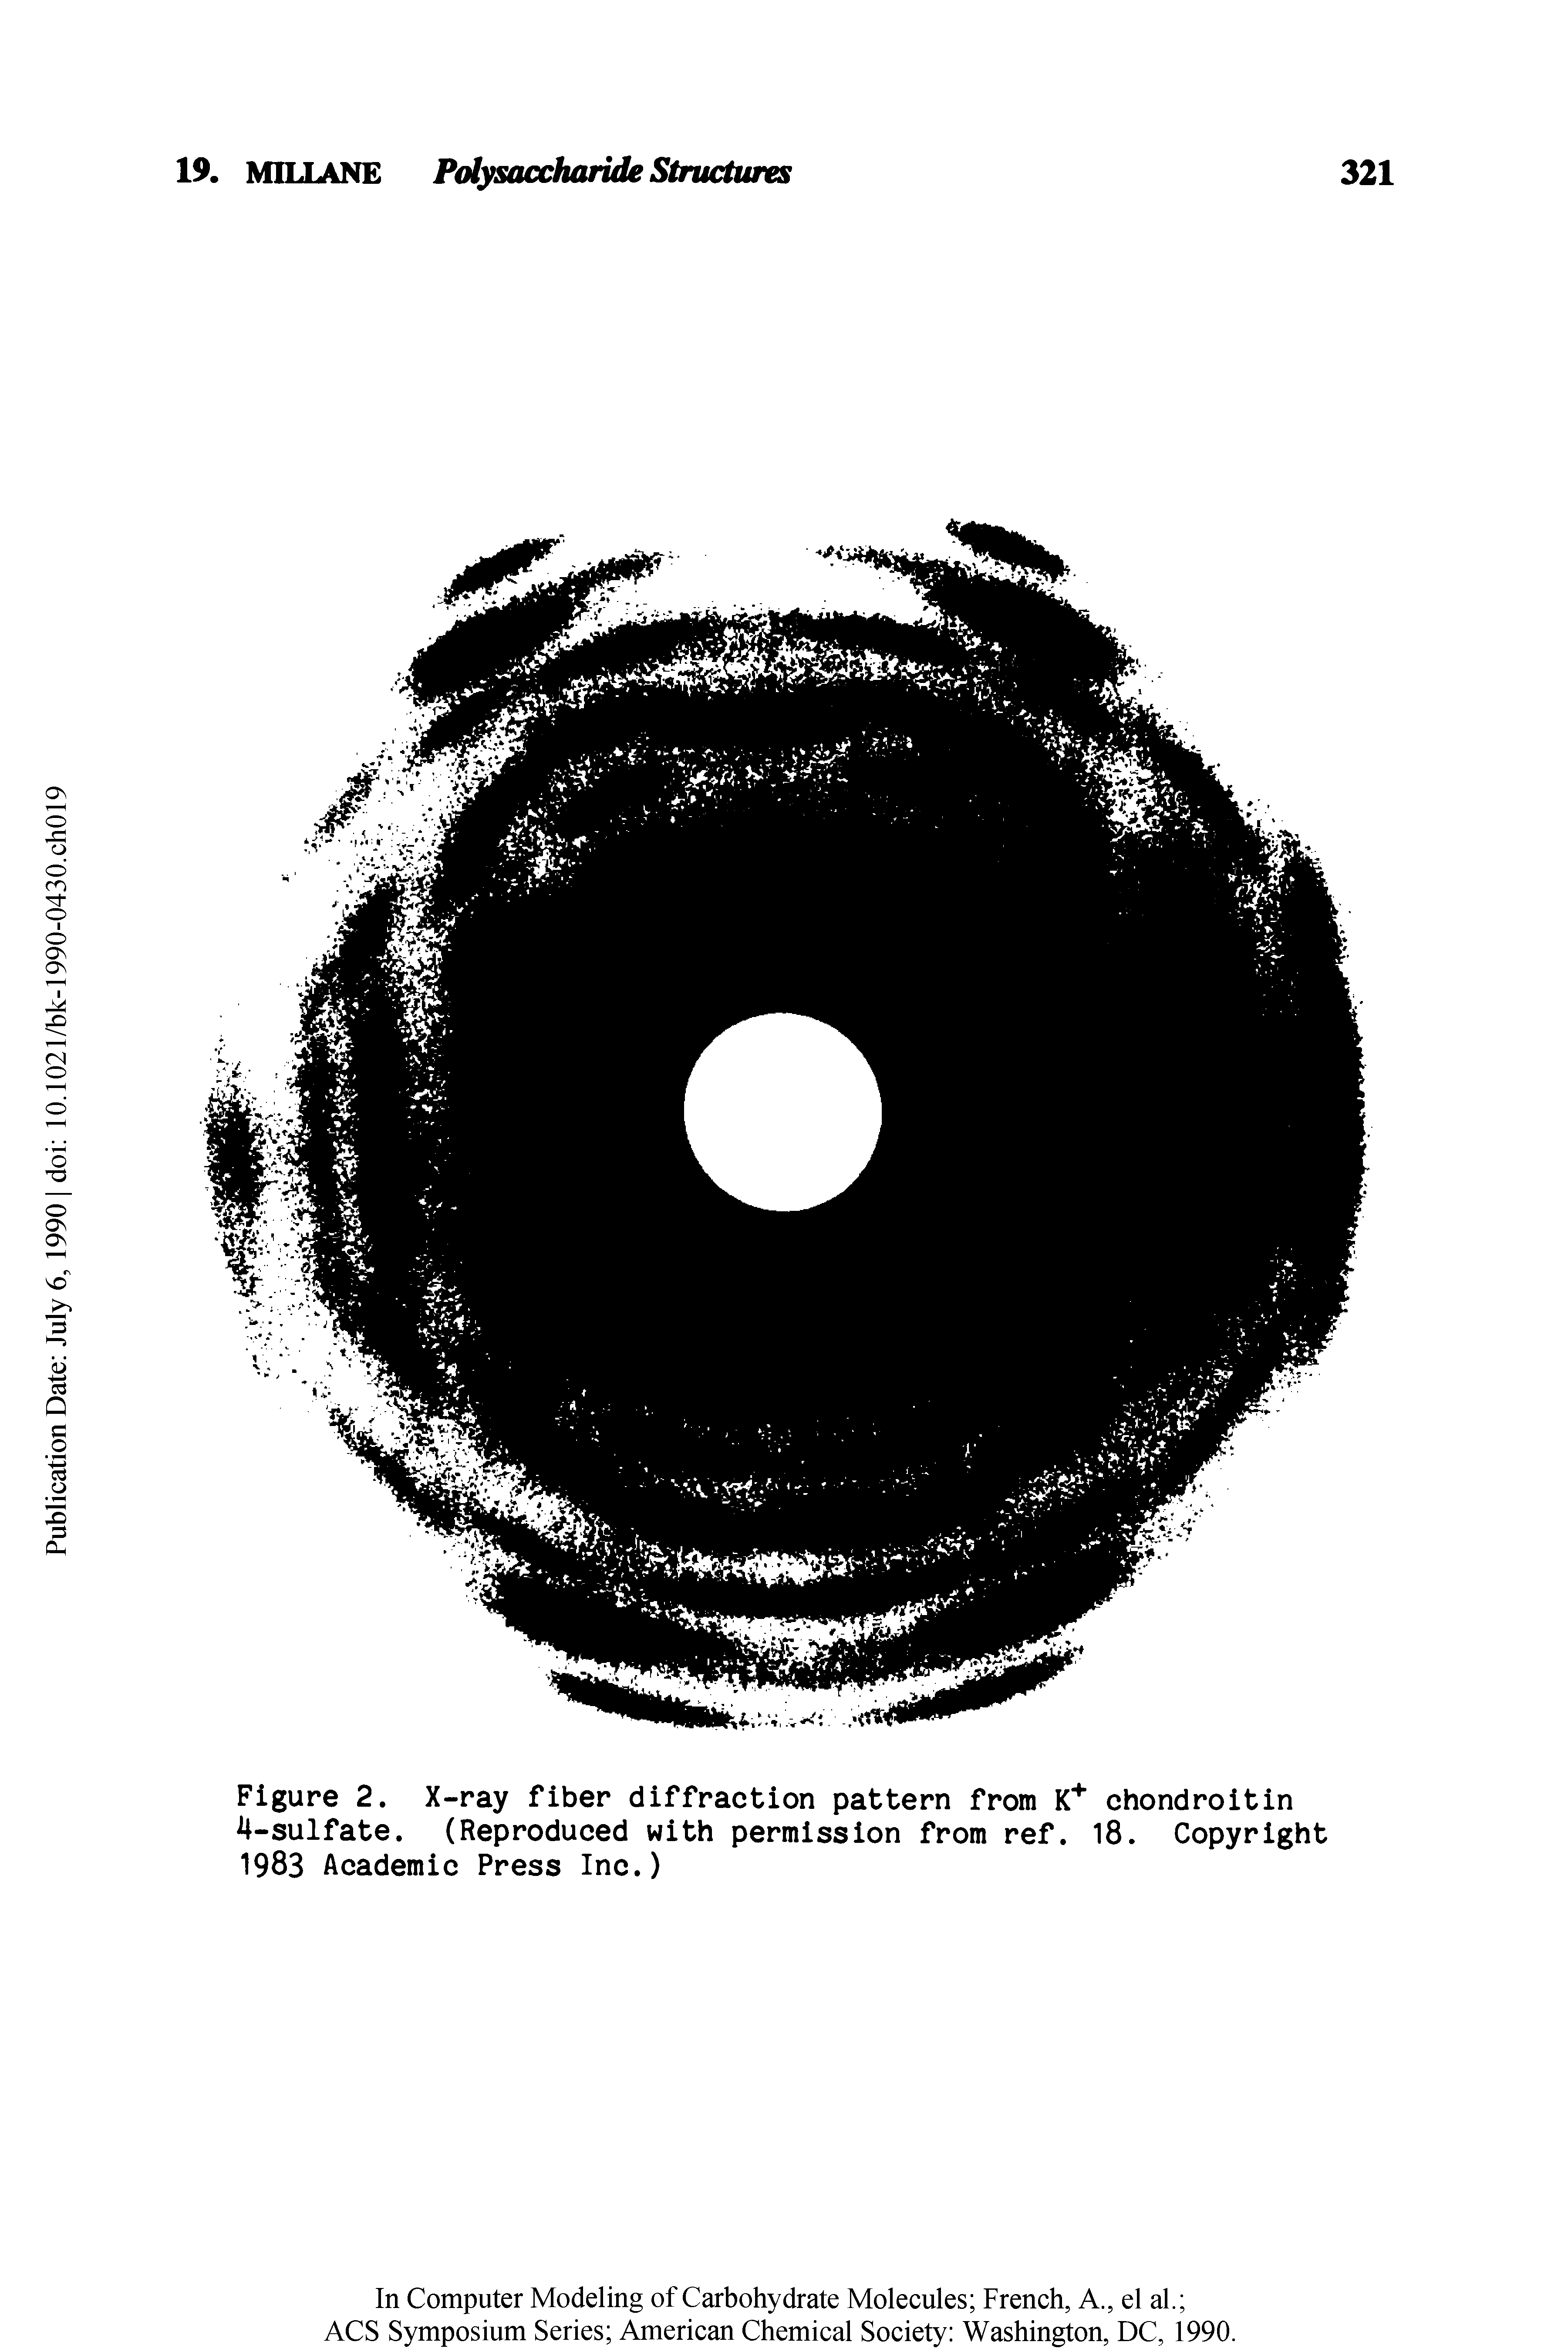 Figure 2. X-ray fiber diffraction pattern from K " chondroitin 4-sulfate. (Reproduced with permission from ref. 18. Copyright 1983 Academic Press Inc.)...